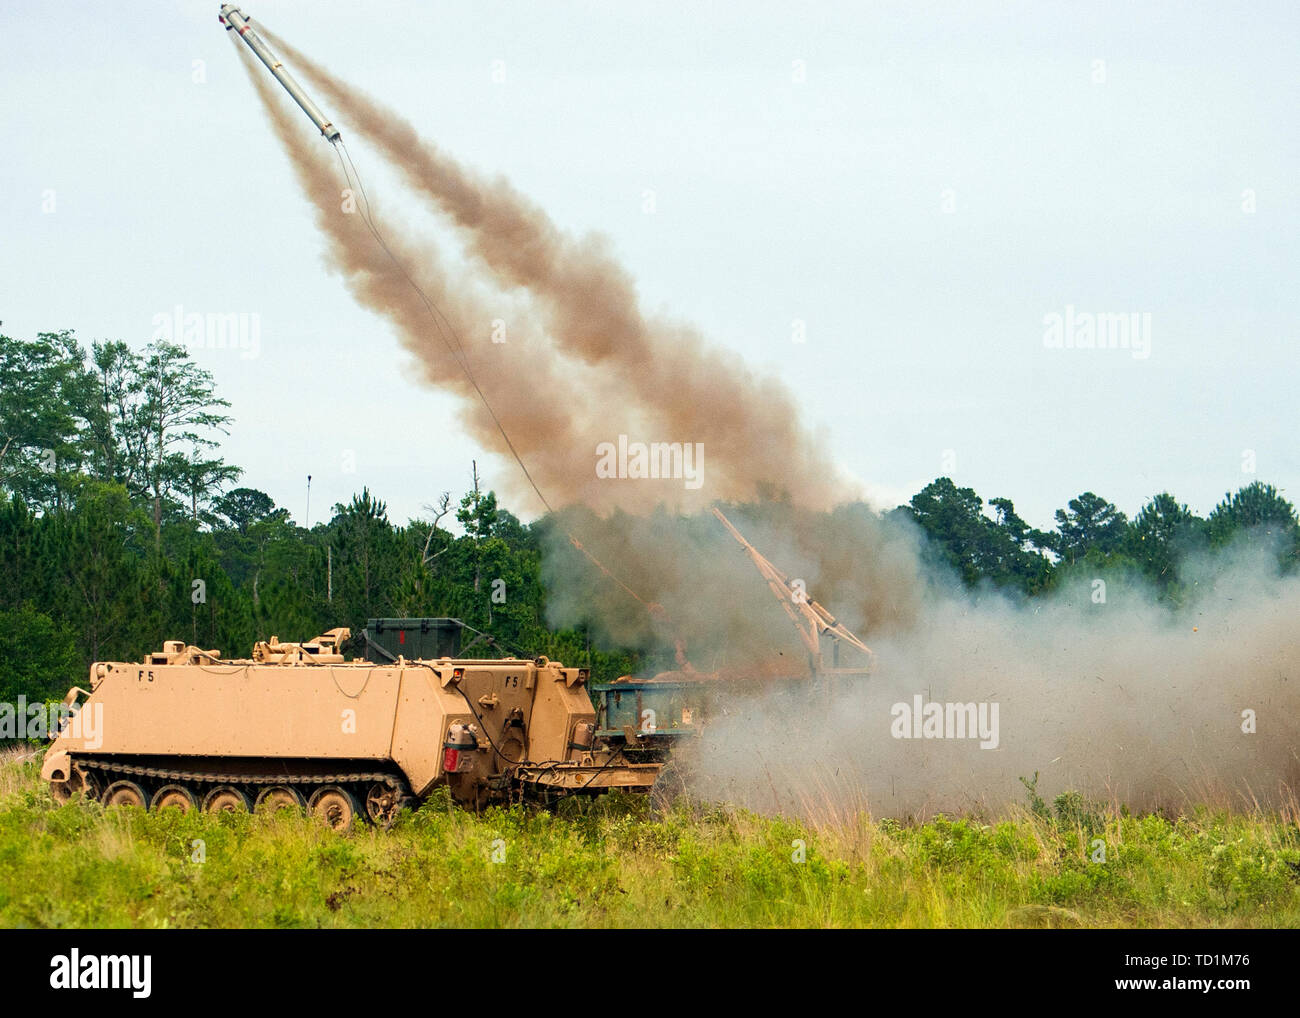 U.S. Army National Guard Soldiers with the 174th Engineer Company, 178th Engineer Battalion, 59th Troop Command, South Carolina National Guard, conduct Mine Clearing Line Charge live-fire operations at Fort Stewart, Georgia, June 8, 2019, during annual training. (U.S. Army National Guard photo by Sgt. Brian Calhoun, 108th Public Affairs Detachment) Stock Photo